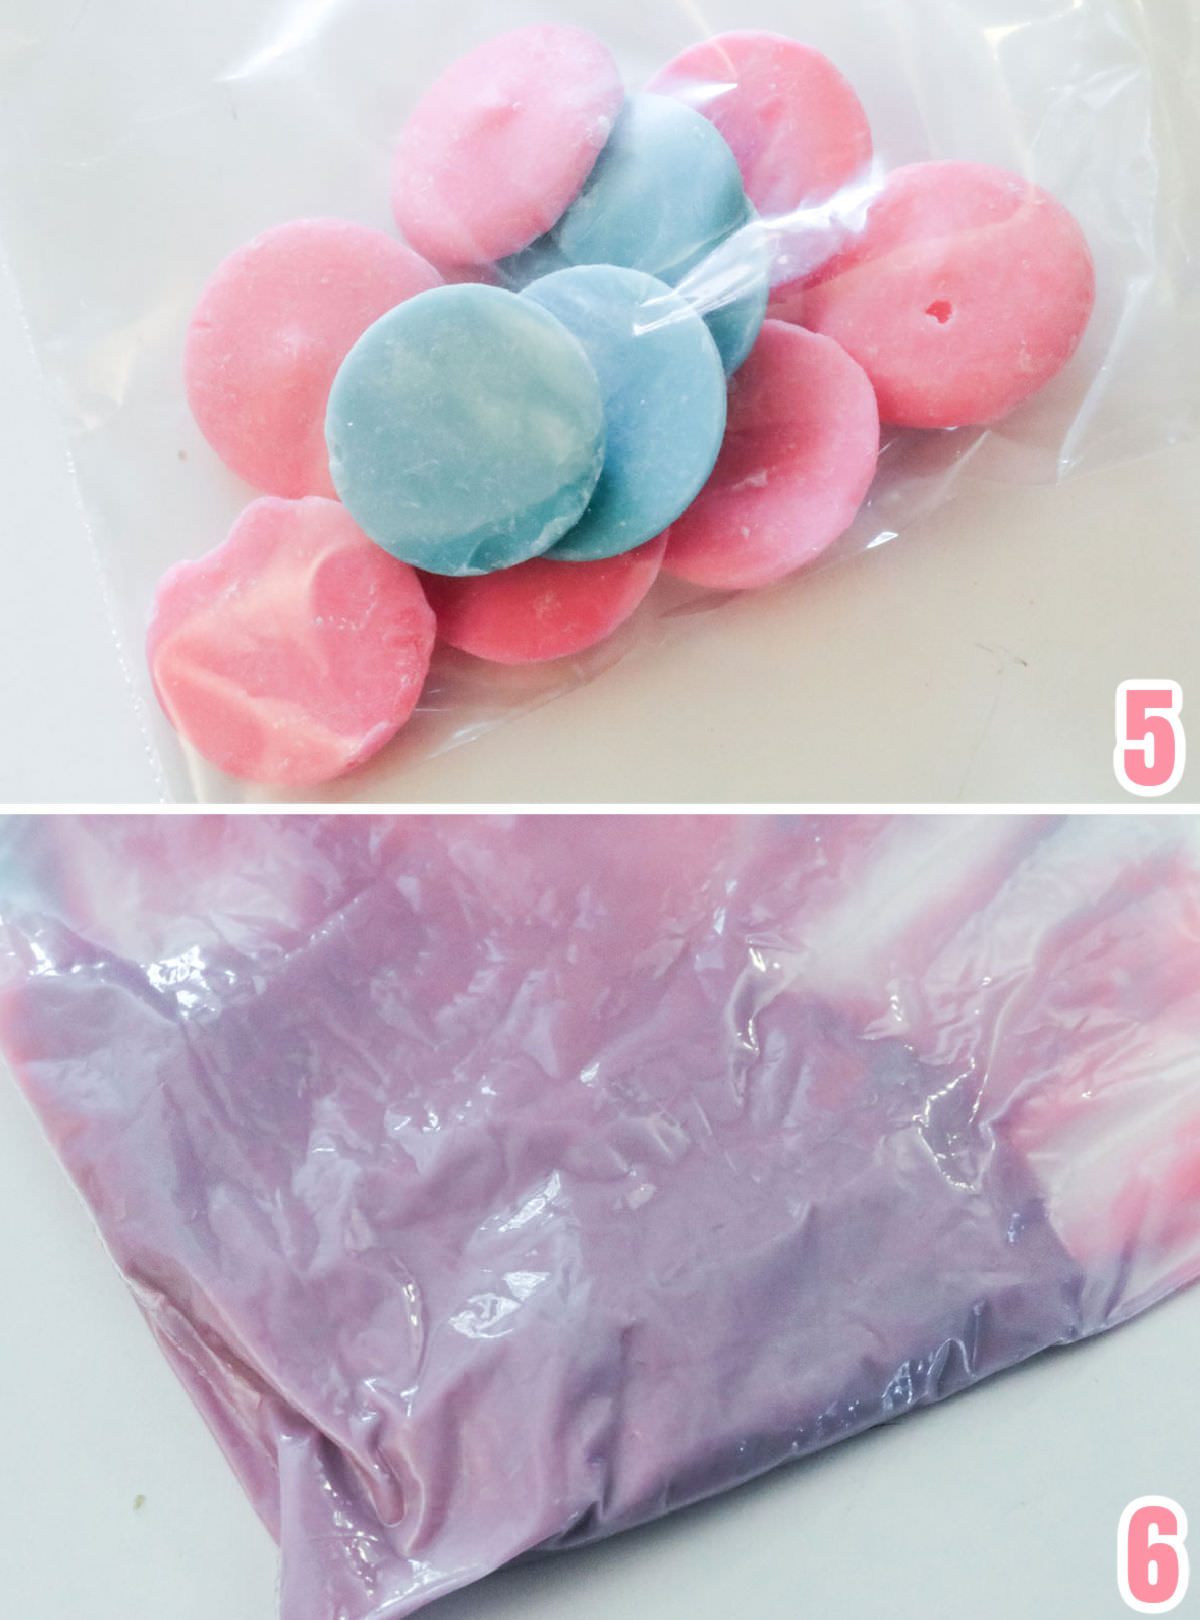 Collage image showing how we used plastic baggies to melt the candy melts to create the decorative drizzles on the marshmallow pops.